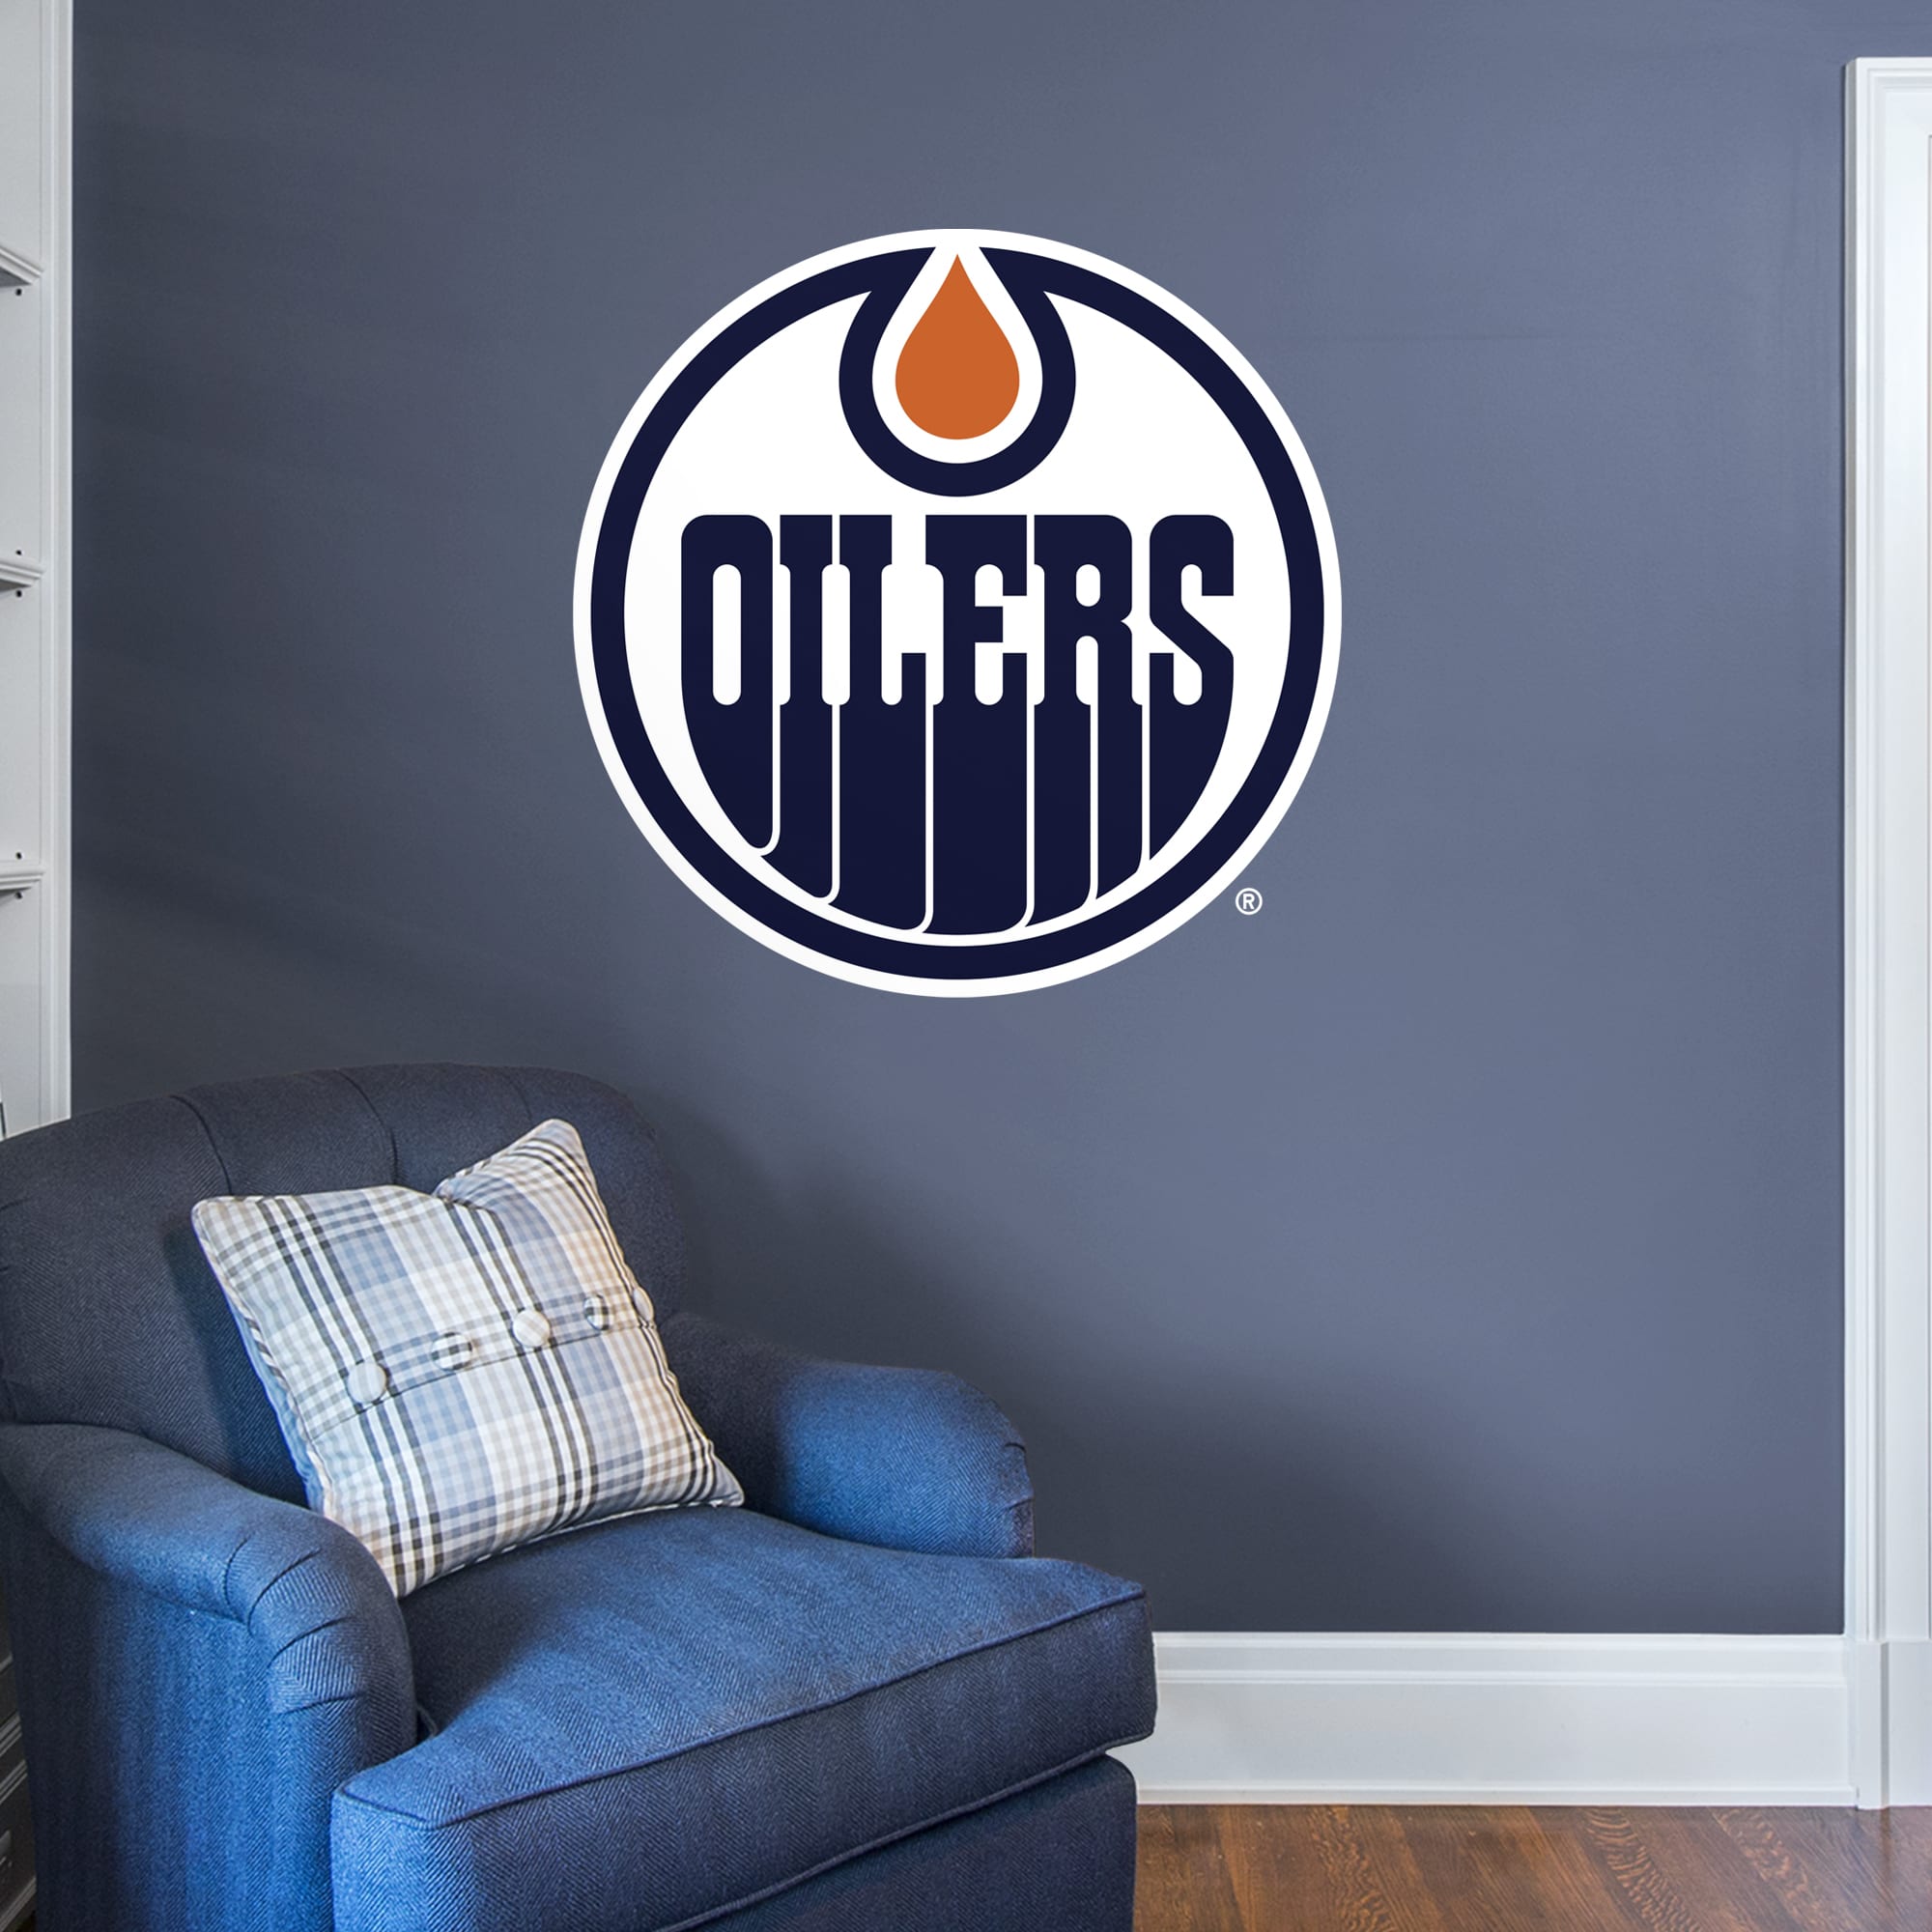 Edmonton Oilers: Logo - Officially Licensed NHL Removable Wall Decal Giant Logo (39"W x 39"H) by Fathead | Vinyl